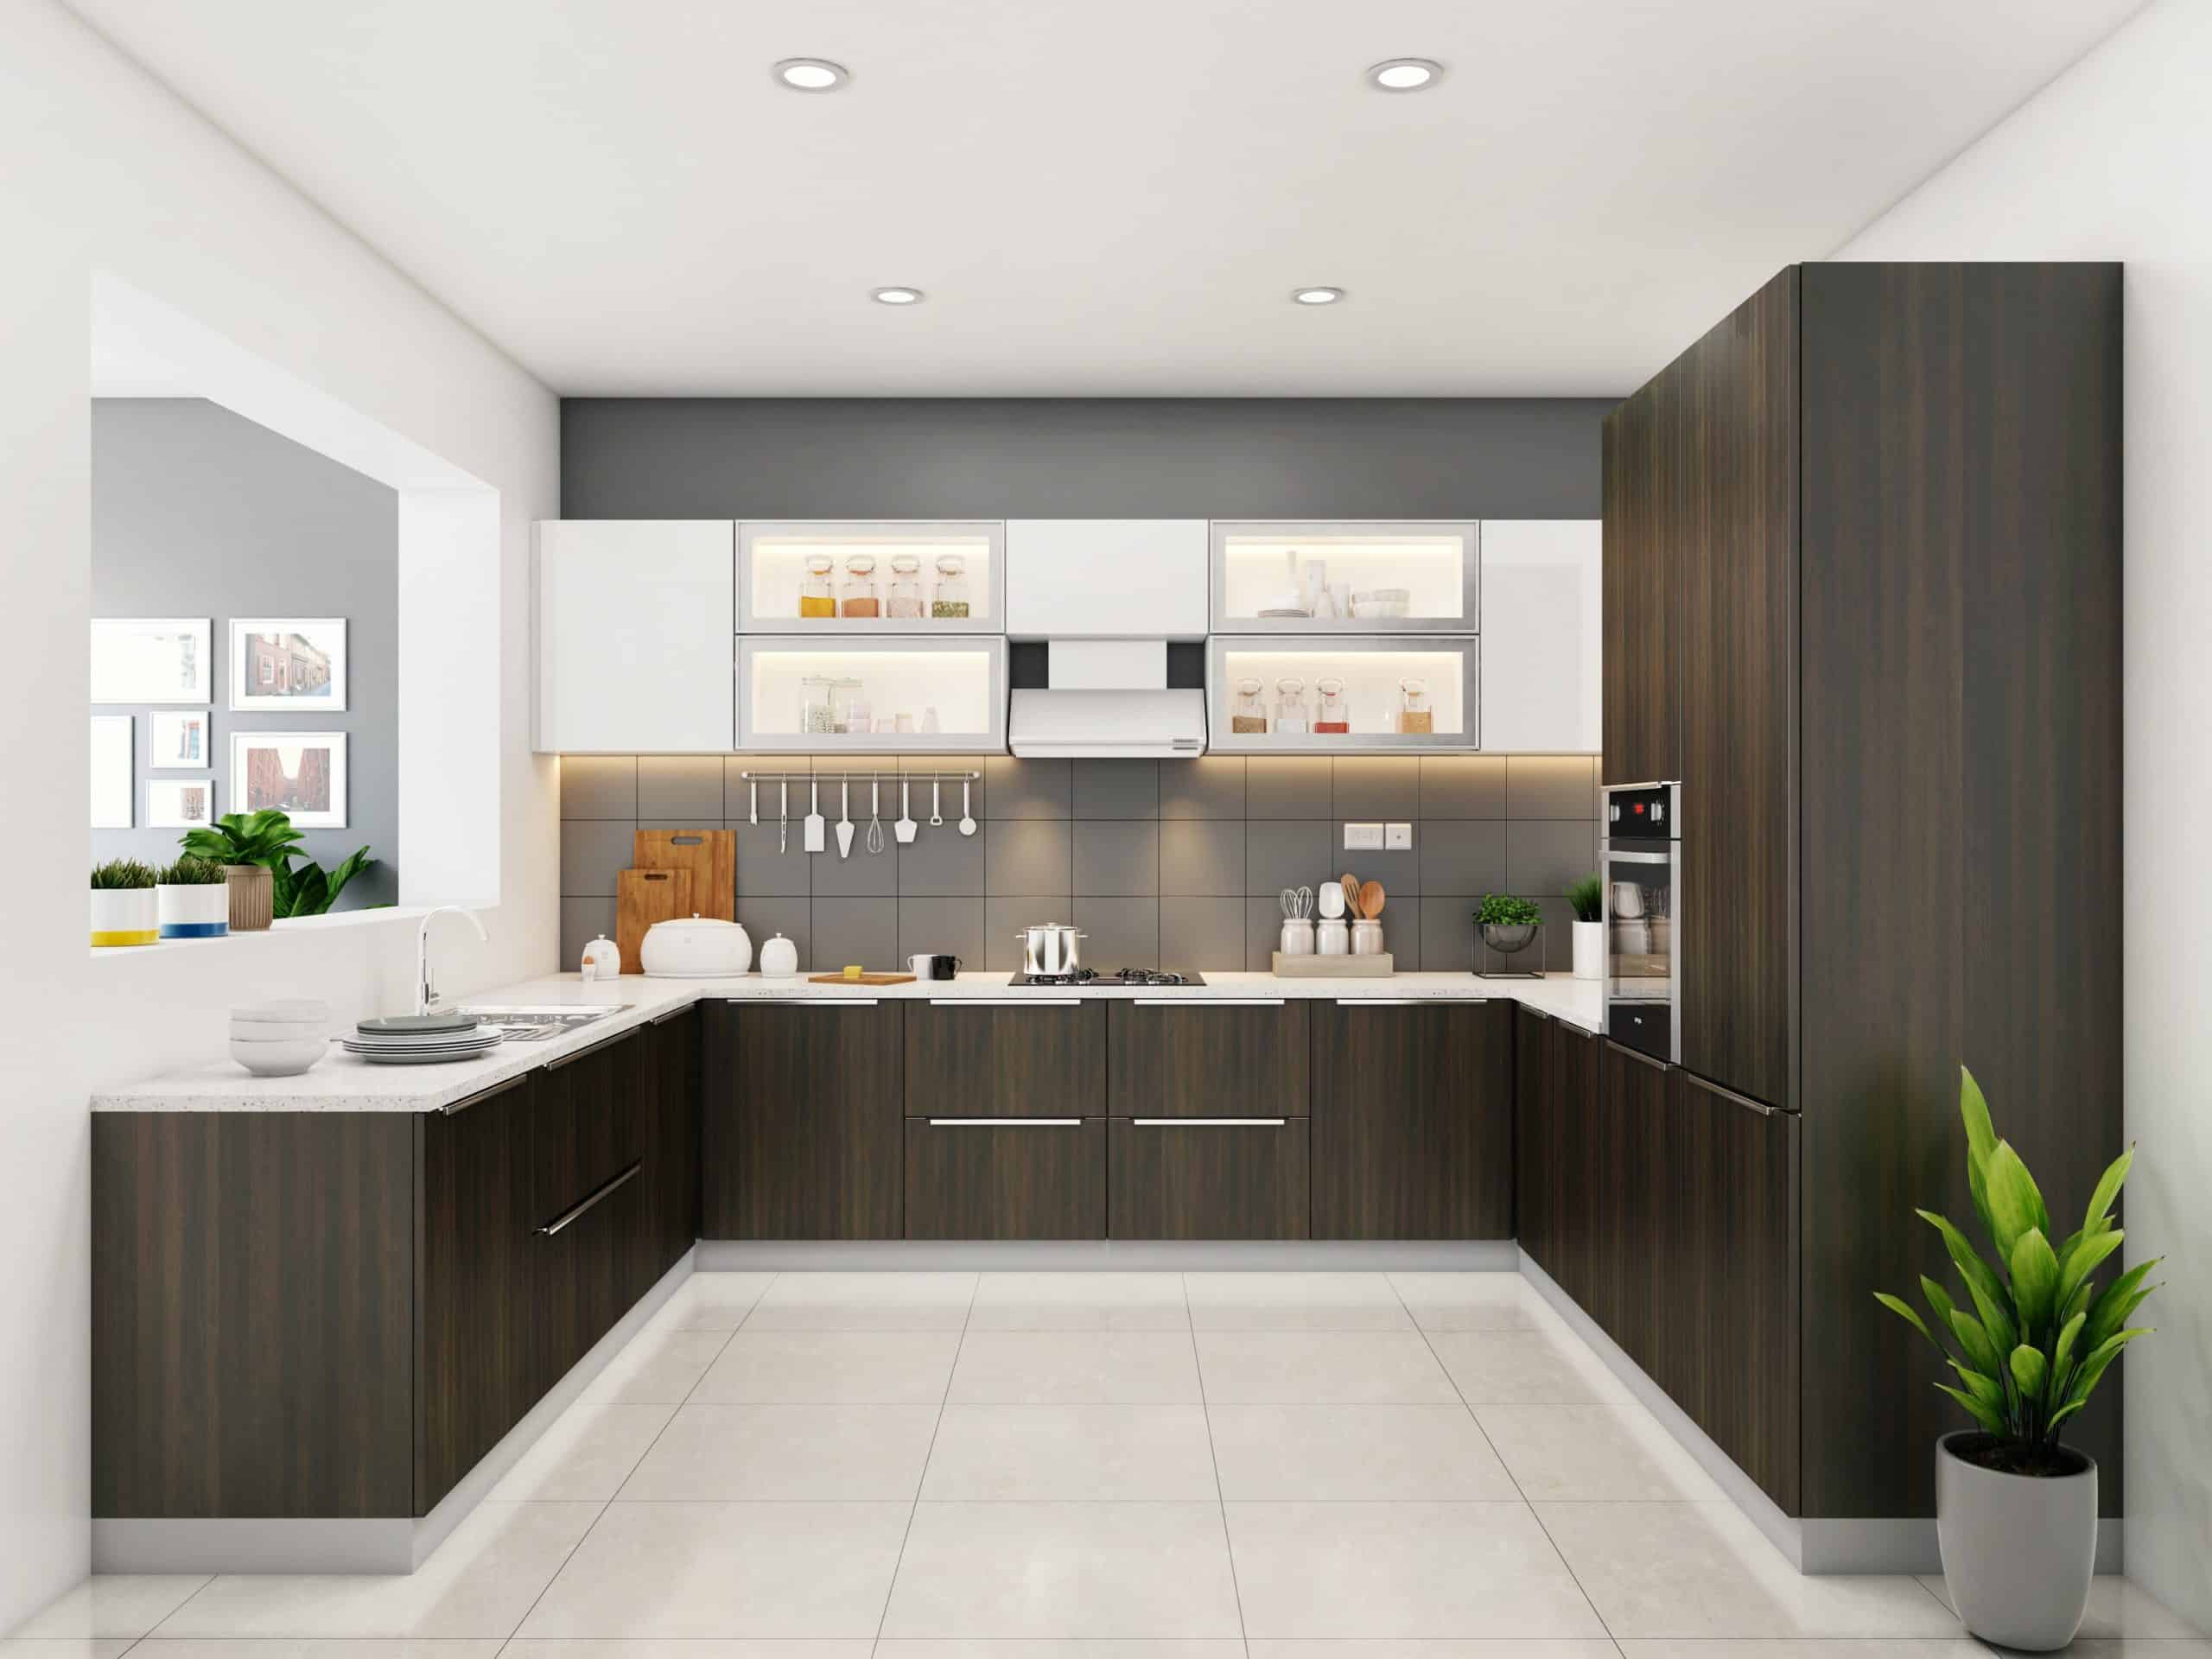 Looking into the Variations of Modular Kitchen Designs